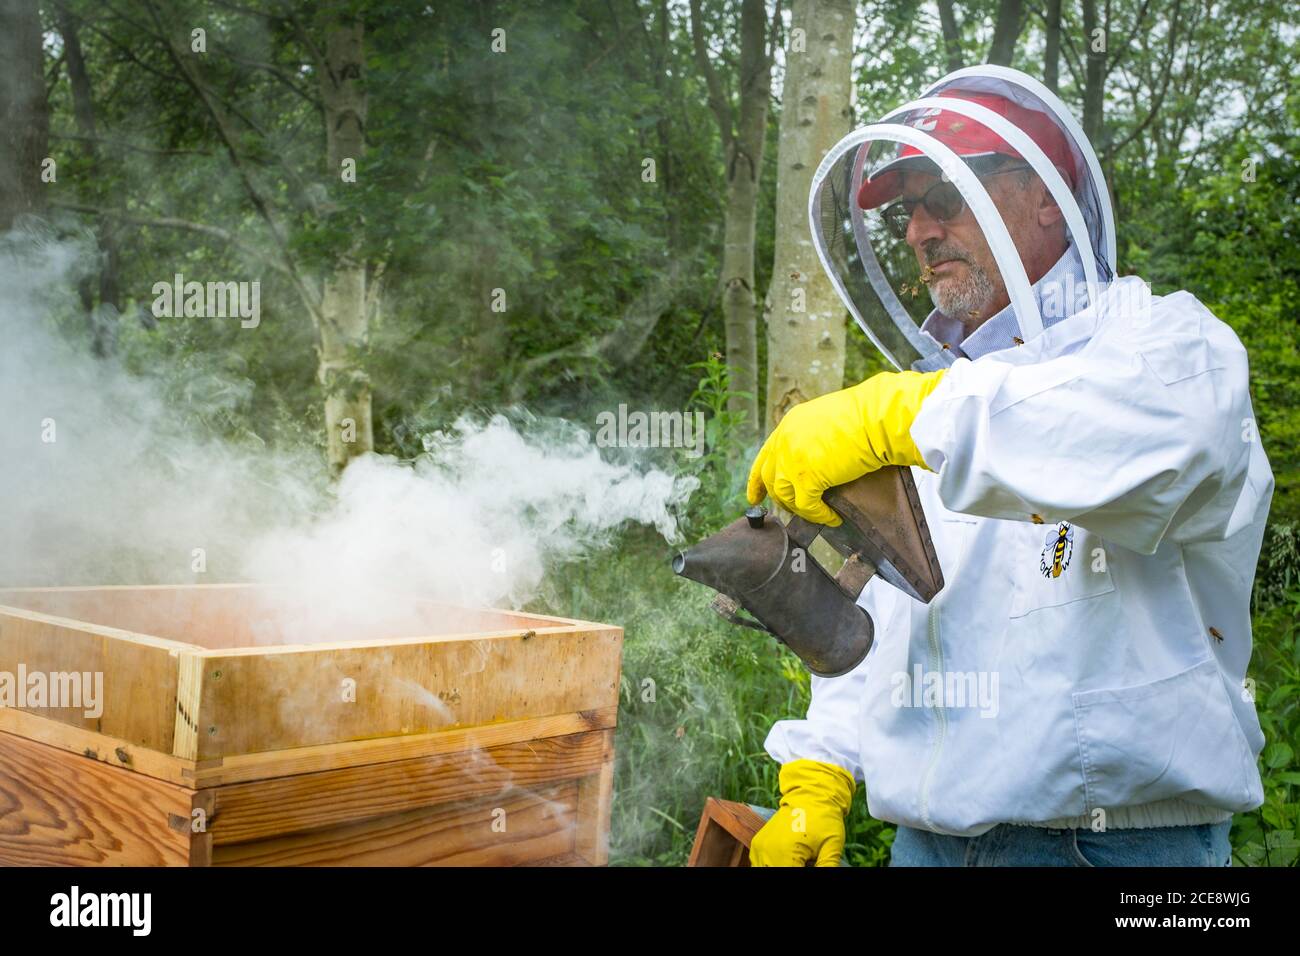 A beekeeper uses a smoker to quiten the hive. Stock Photo